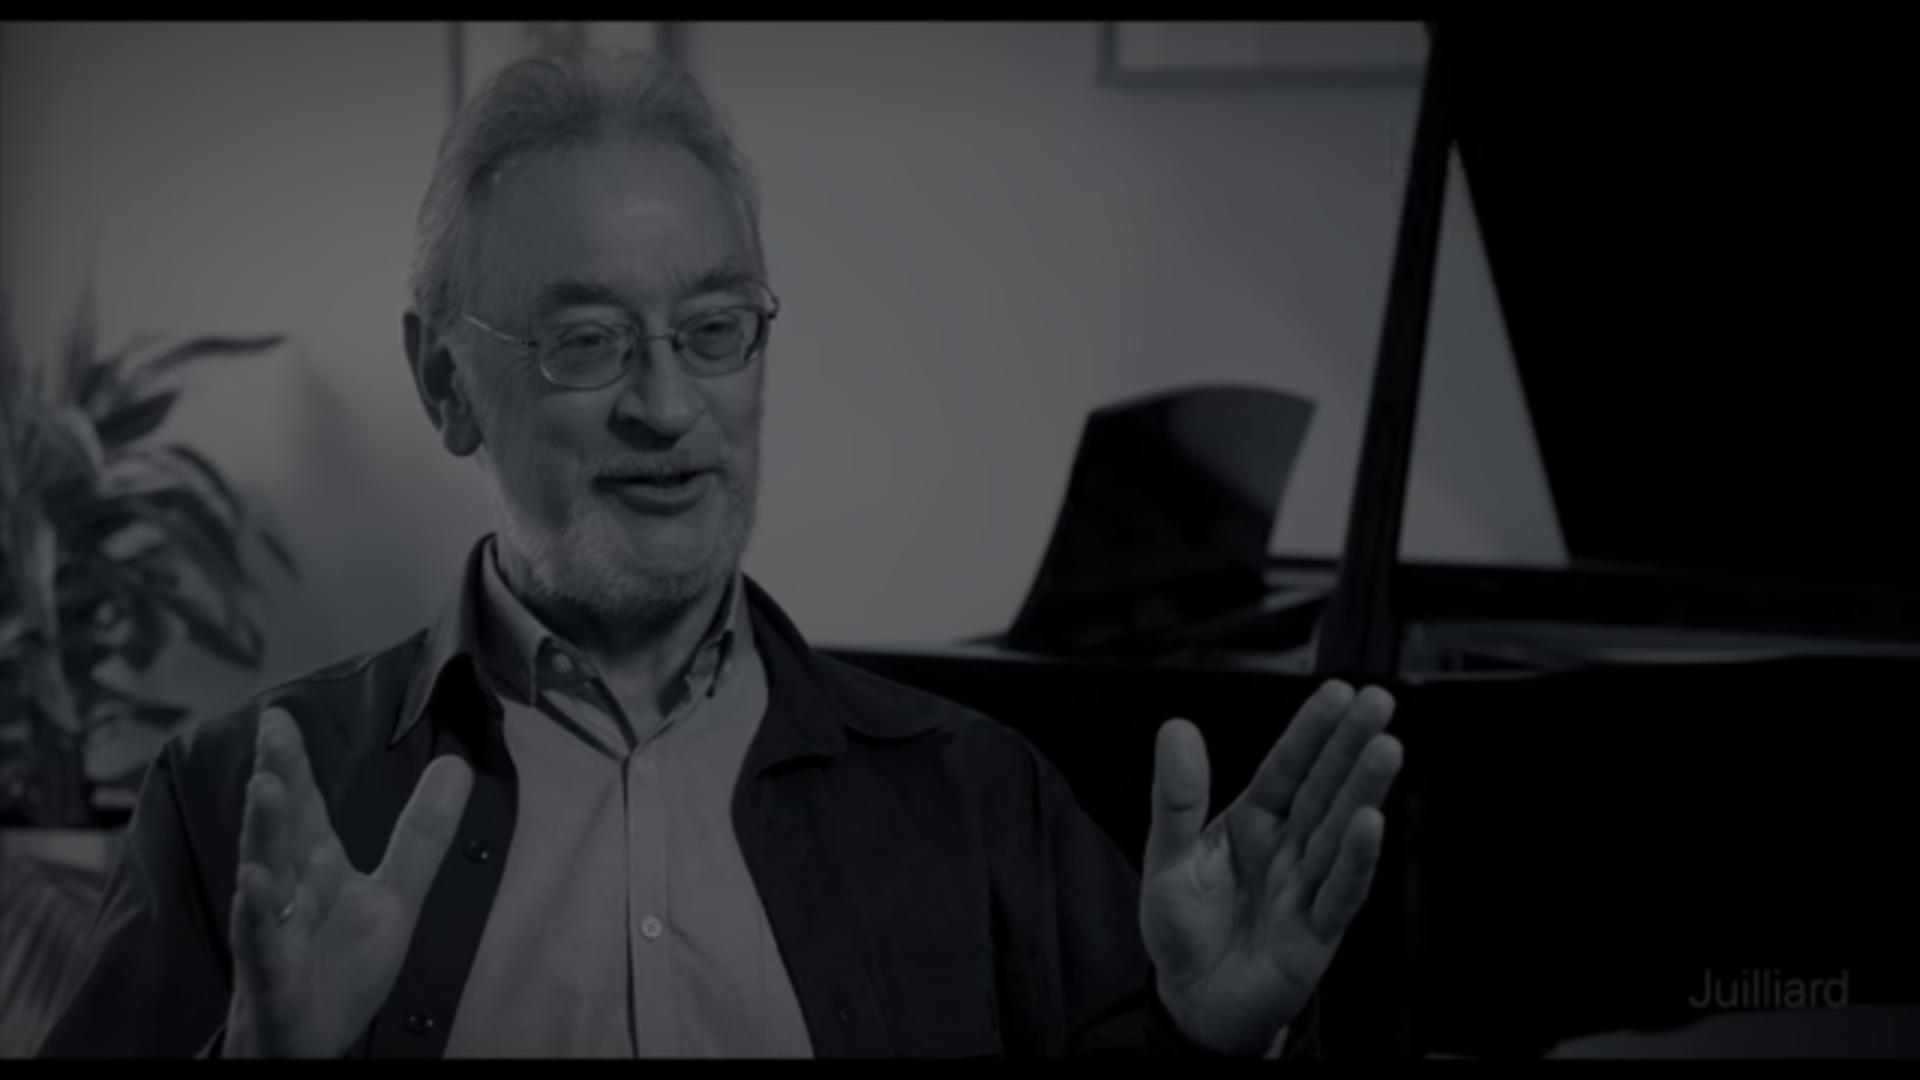 Video feature on Ron Copes, Juilliard violin faculty member